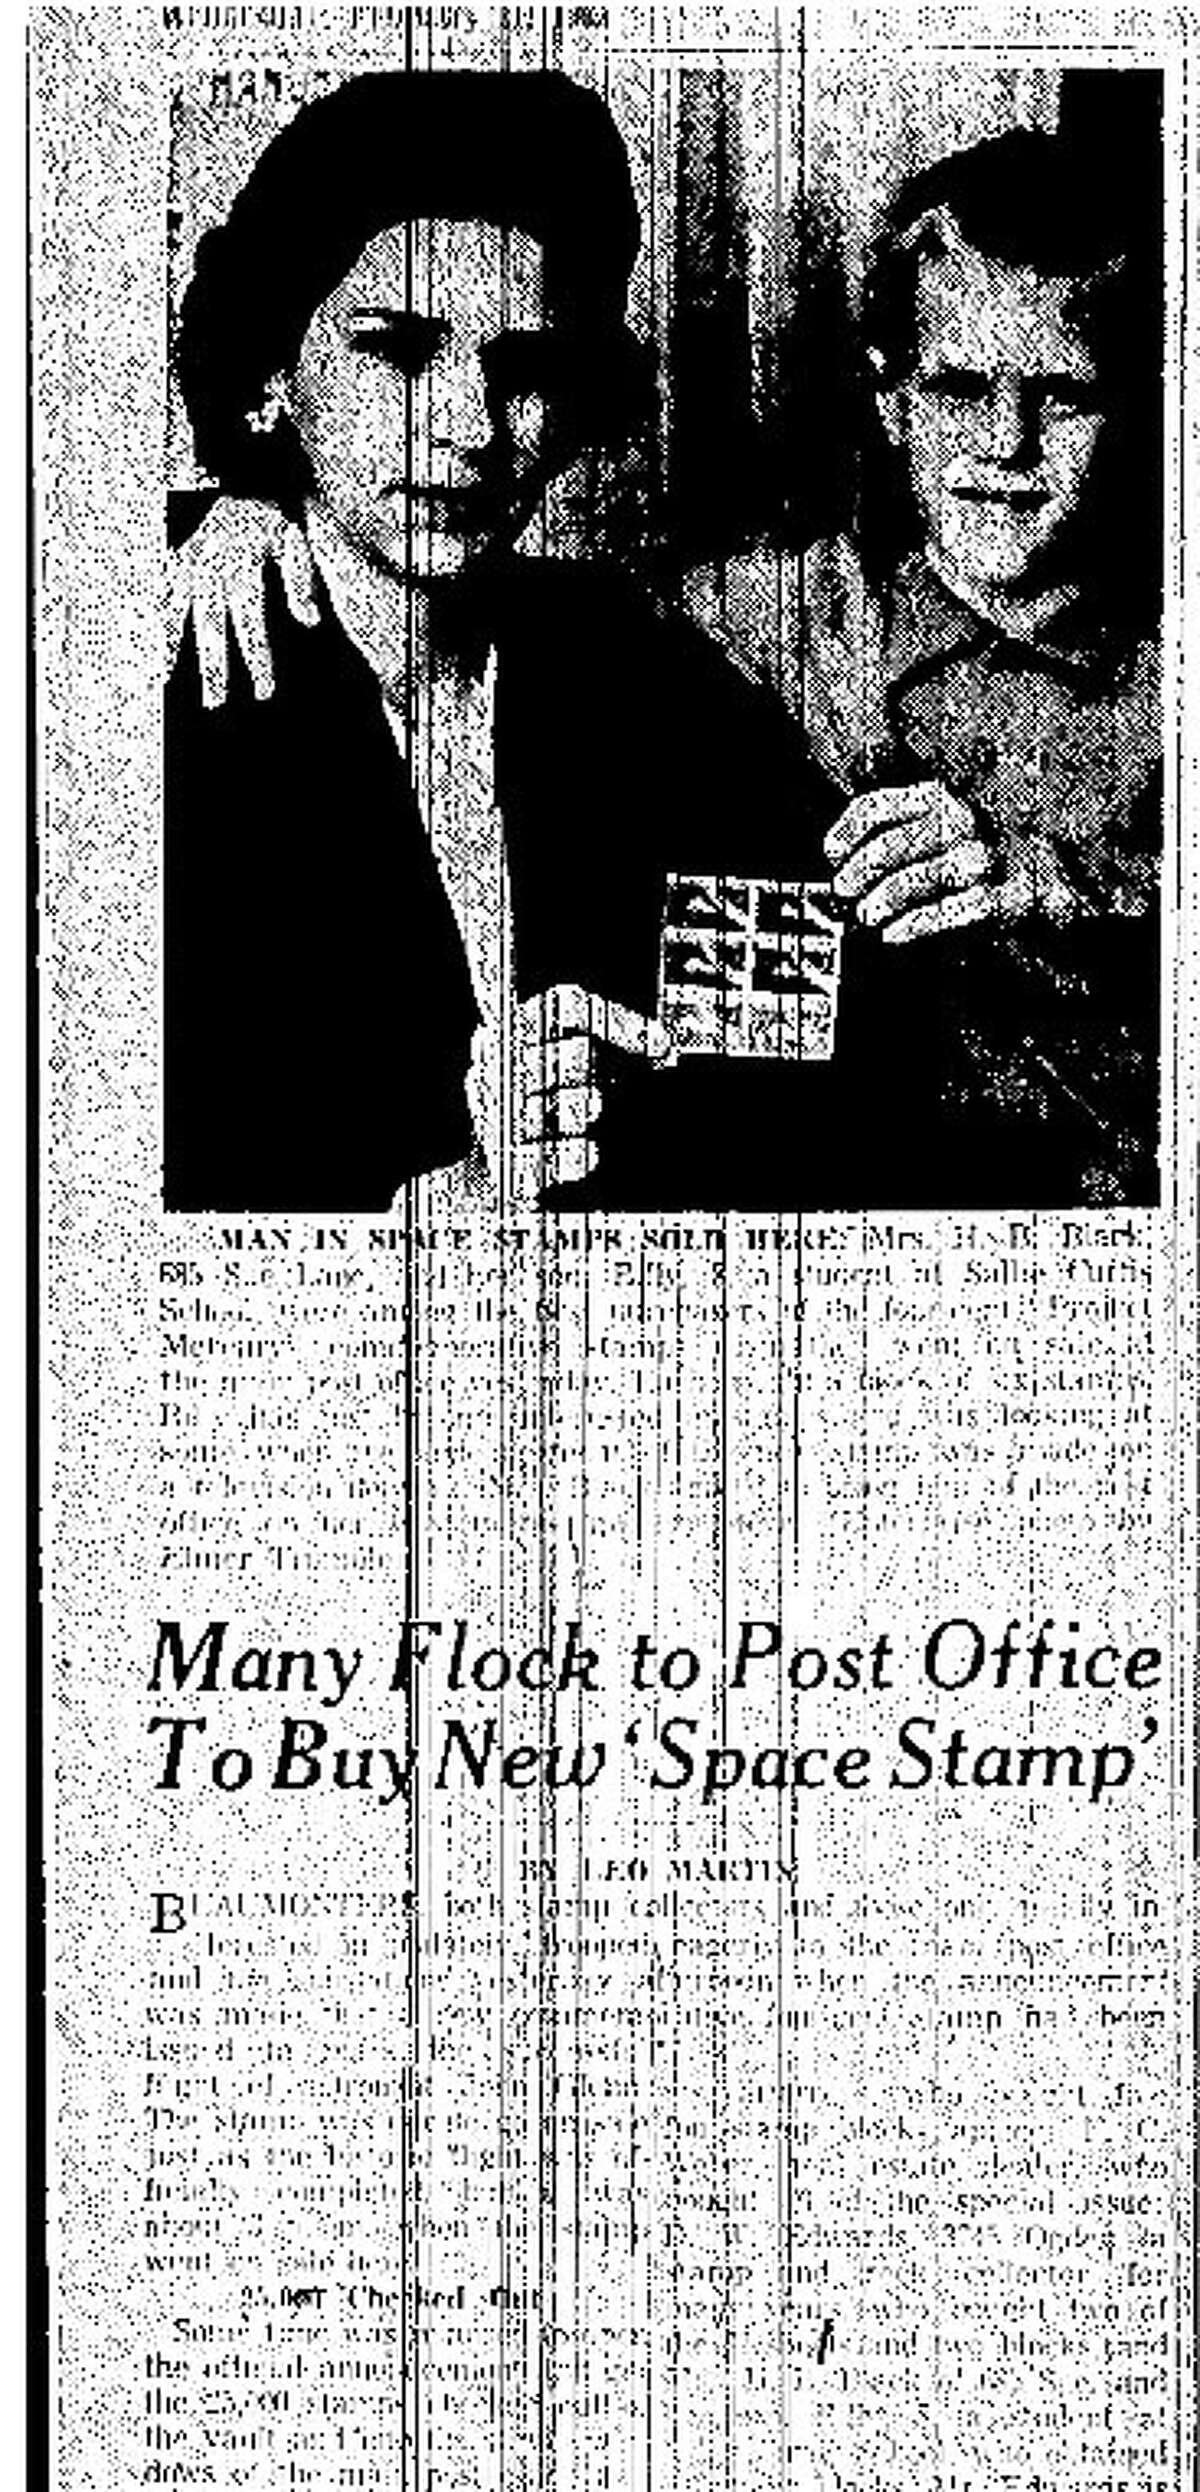 A young Bill Black and his mother Inge Black in a 1962 copy of the Beaumont Enterprise. The two were photogrpahed while purchasing the 4-cent Project Mercury postage stamp at Beaumont's main Post Office. Enterprise file photo